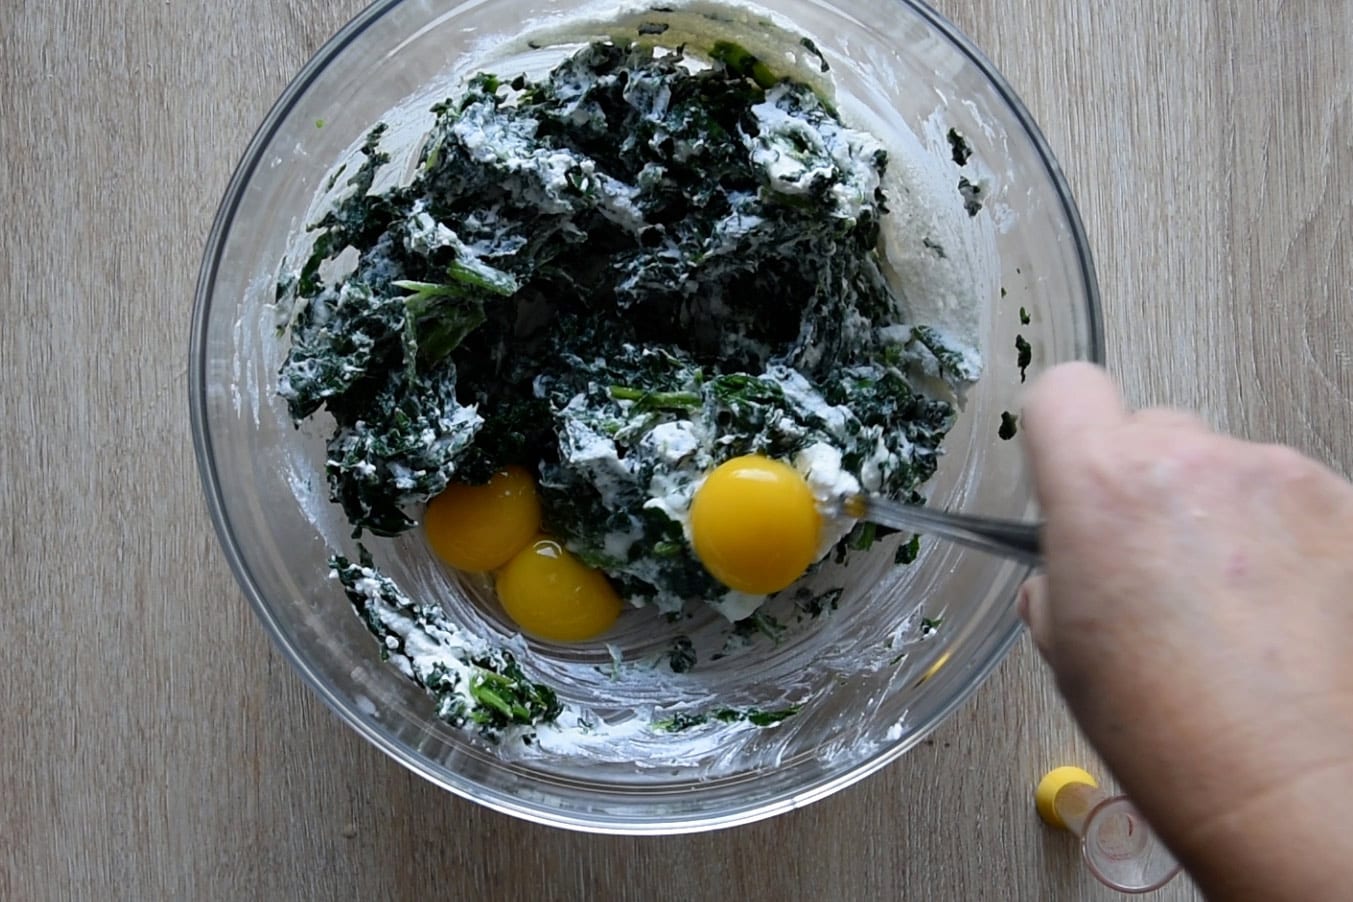 Adding the egg yolks to the spinach and the ricotta